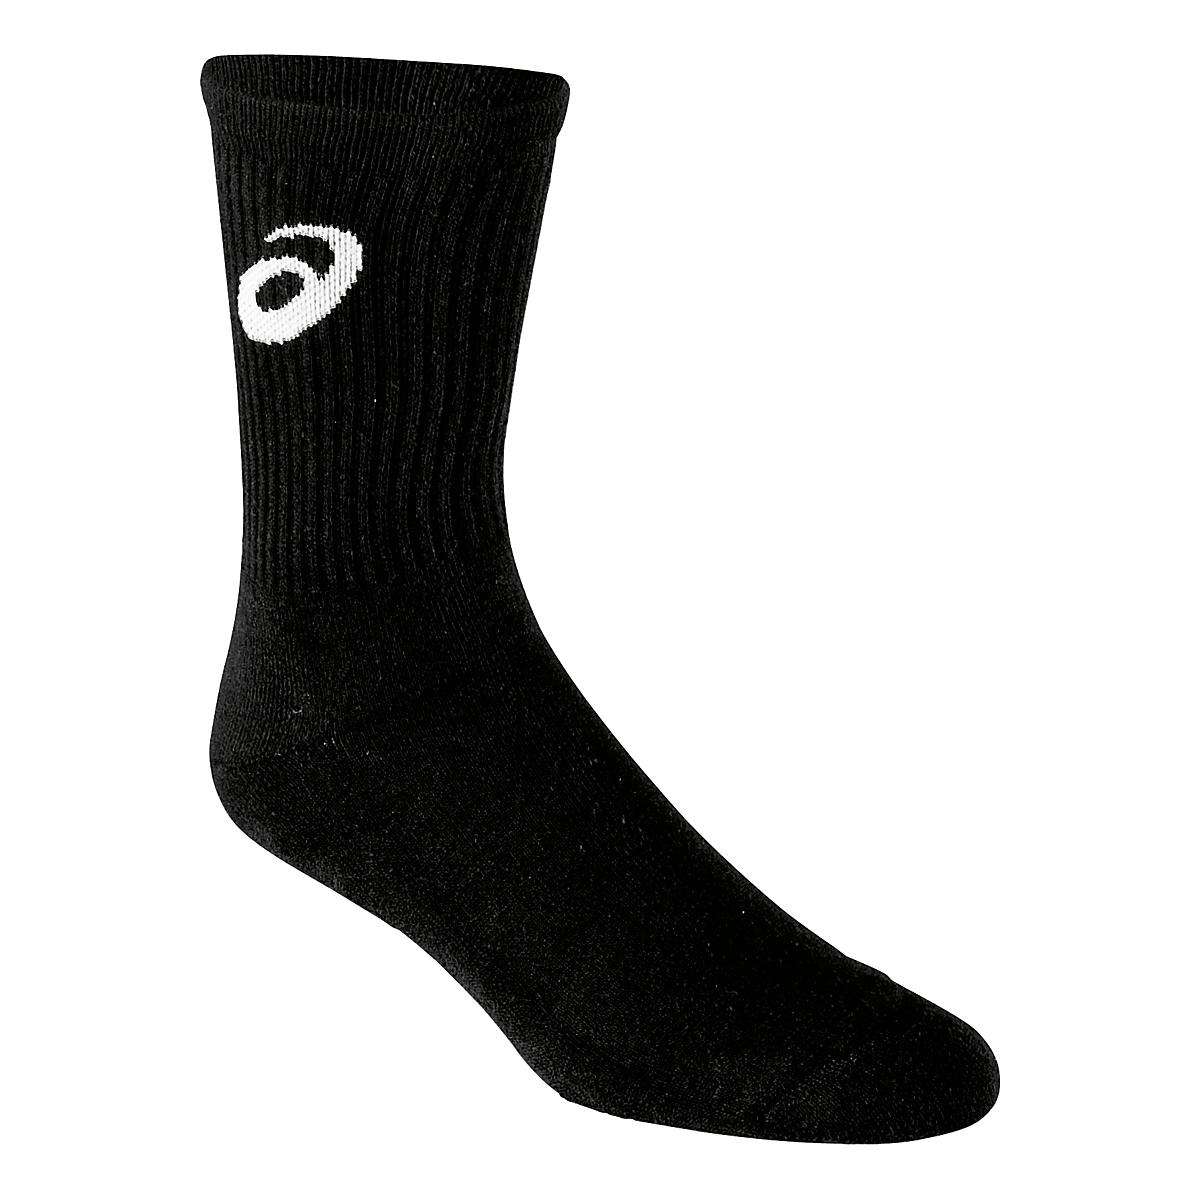 Strassburg Sock Reg. (up to 16 in. calf) Injury Recovery at Road Runner ...